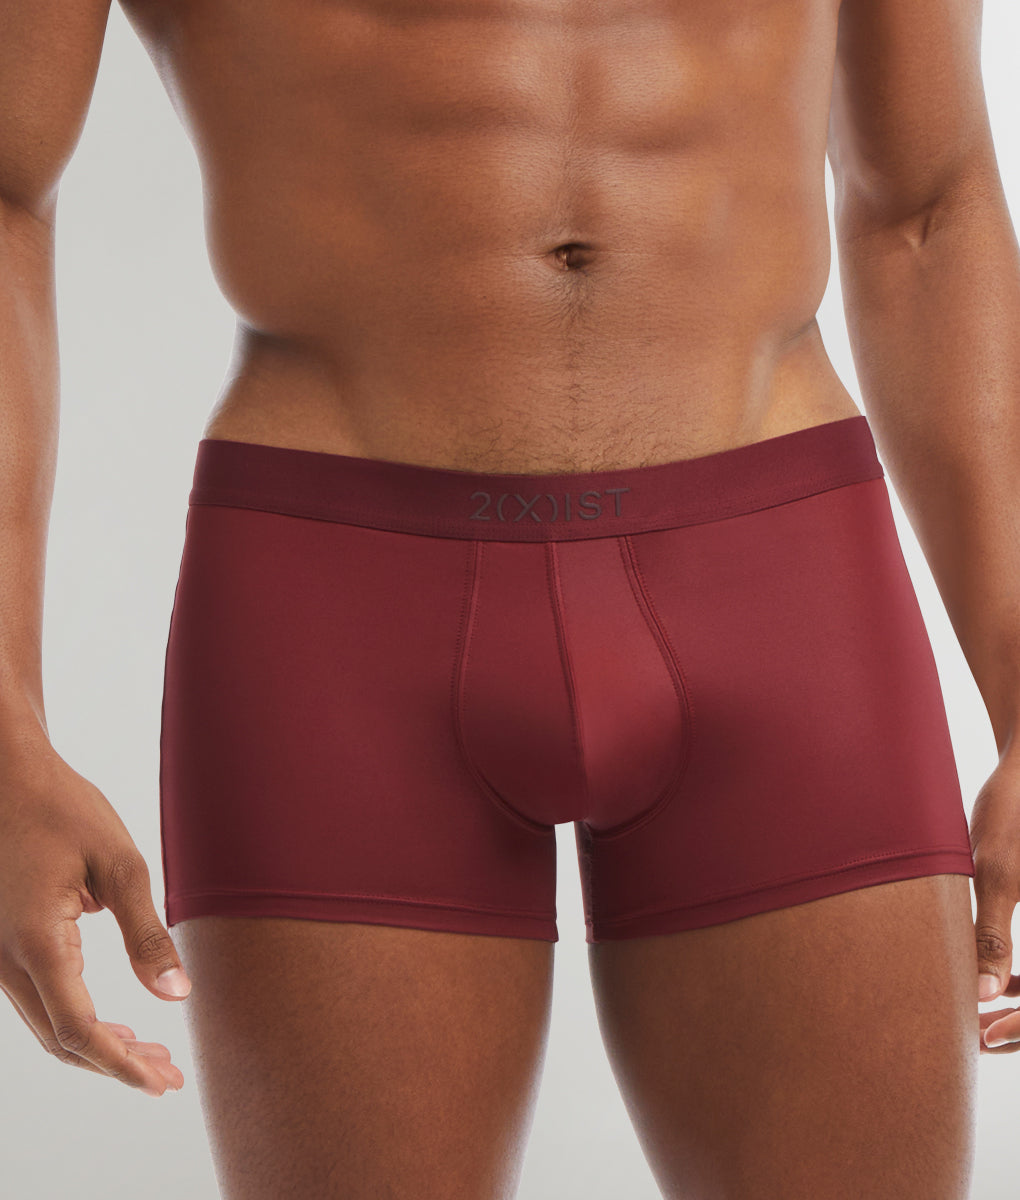 Stay comfortable all day with these 2(X)IST Cotton Stretch No Show Briefs